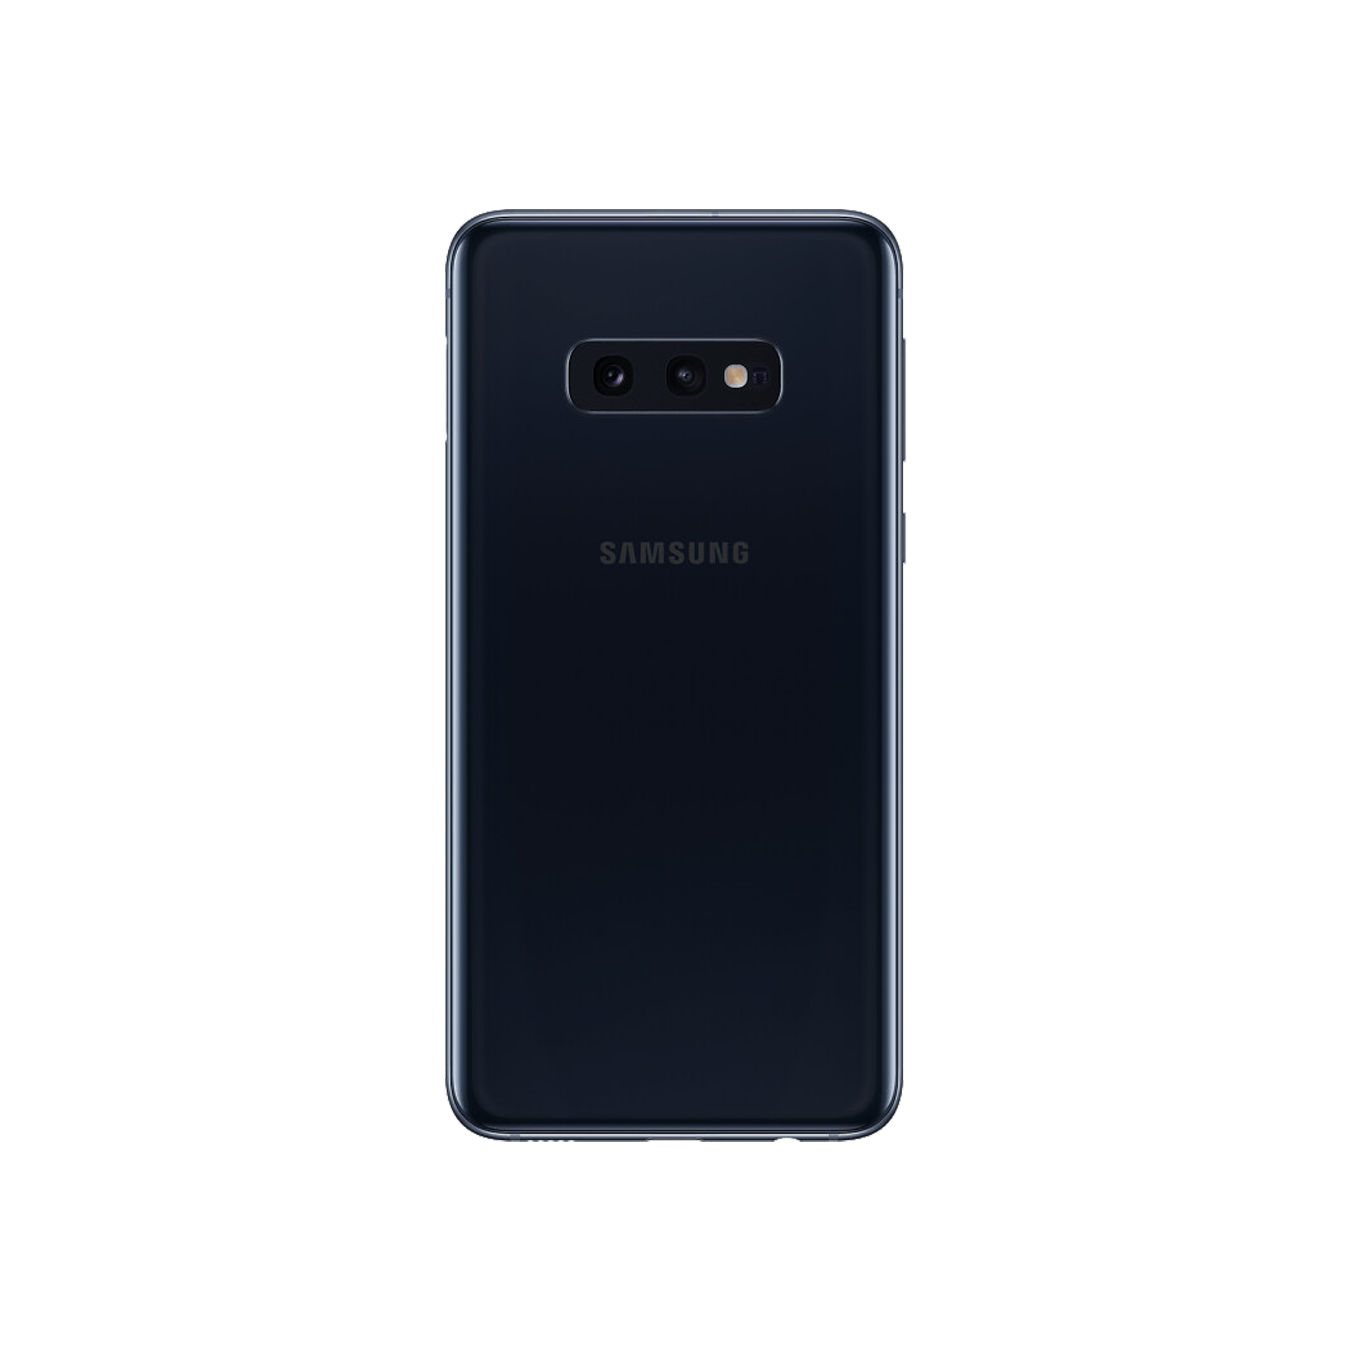 Samsung Galaxy S10E IMEI repair service to fix bad or blacklisted IMEI, ensuring full functionality and connectivity, available at cleanimei.com